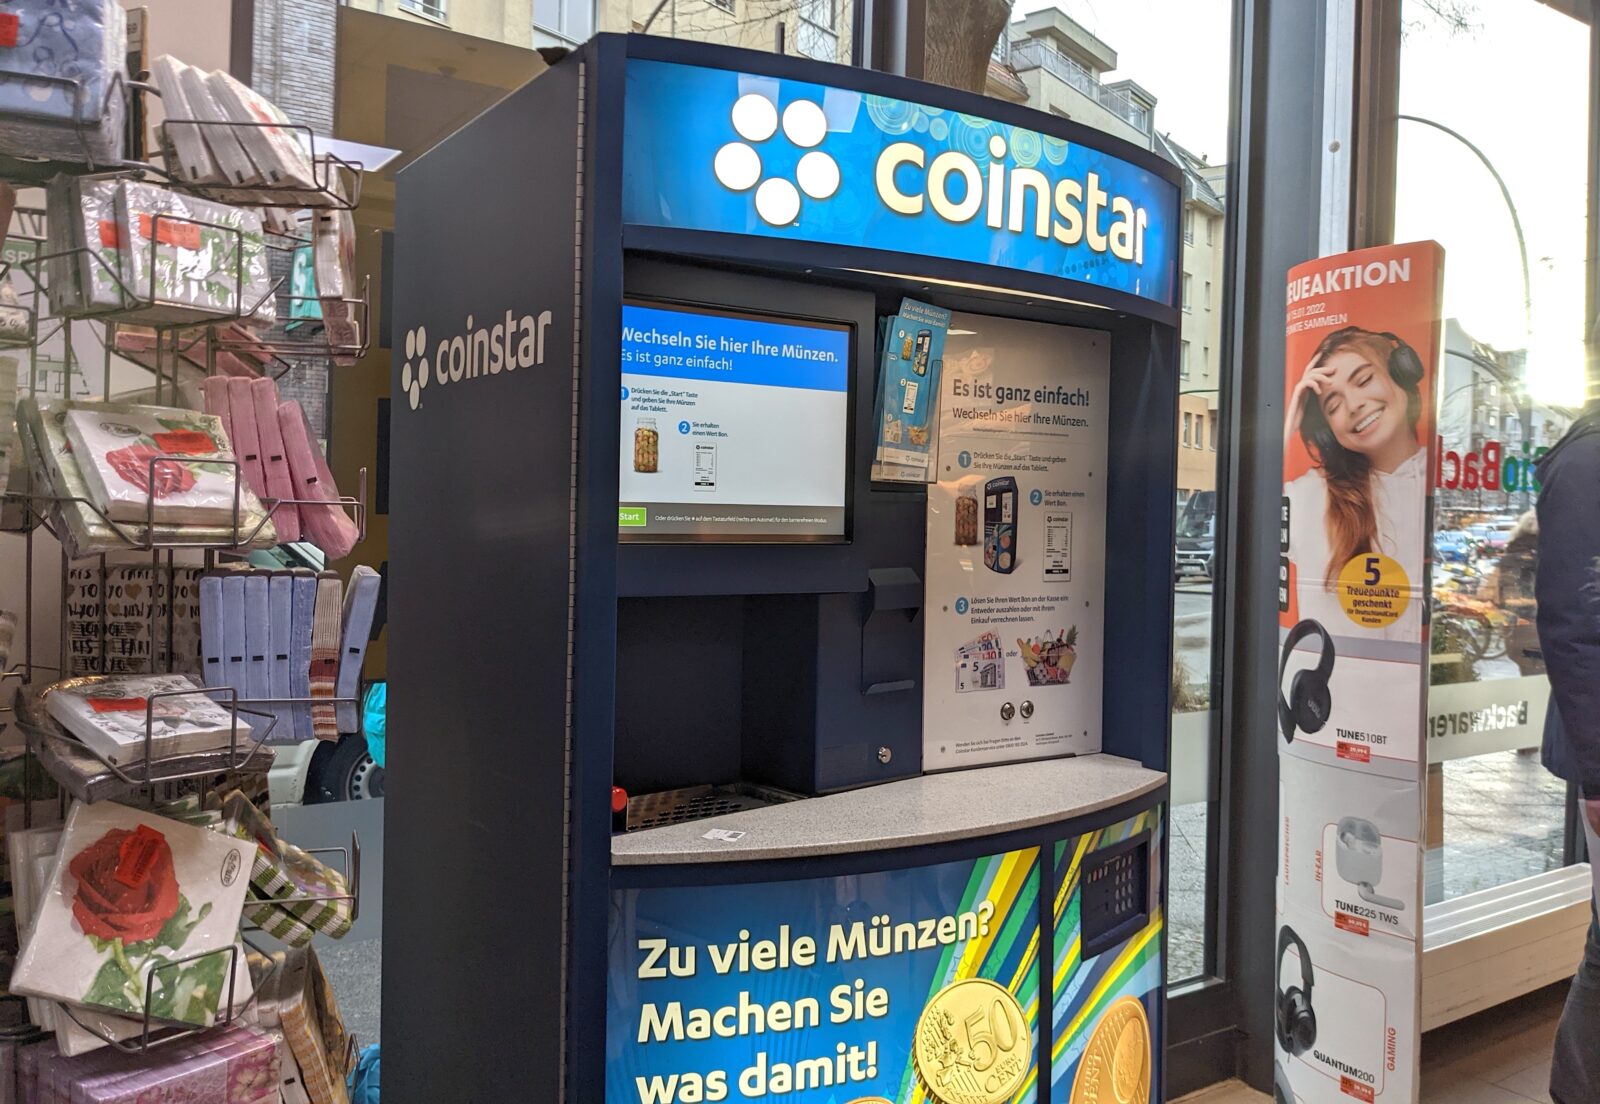 free-coin-counting-machines-near-me-where-can-i-cash-out-coins-for-free